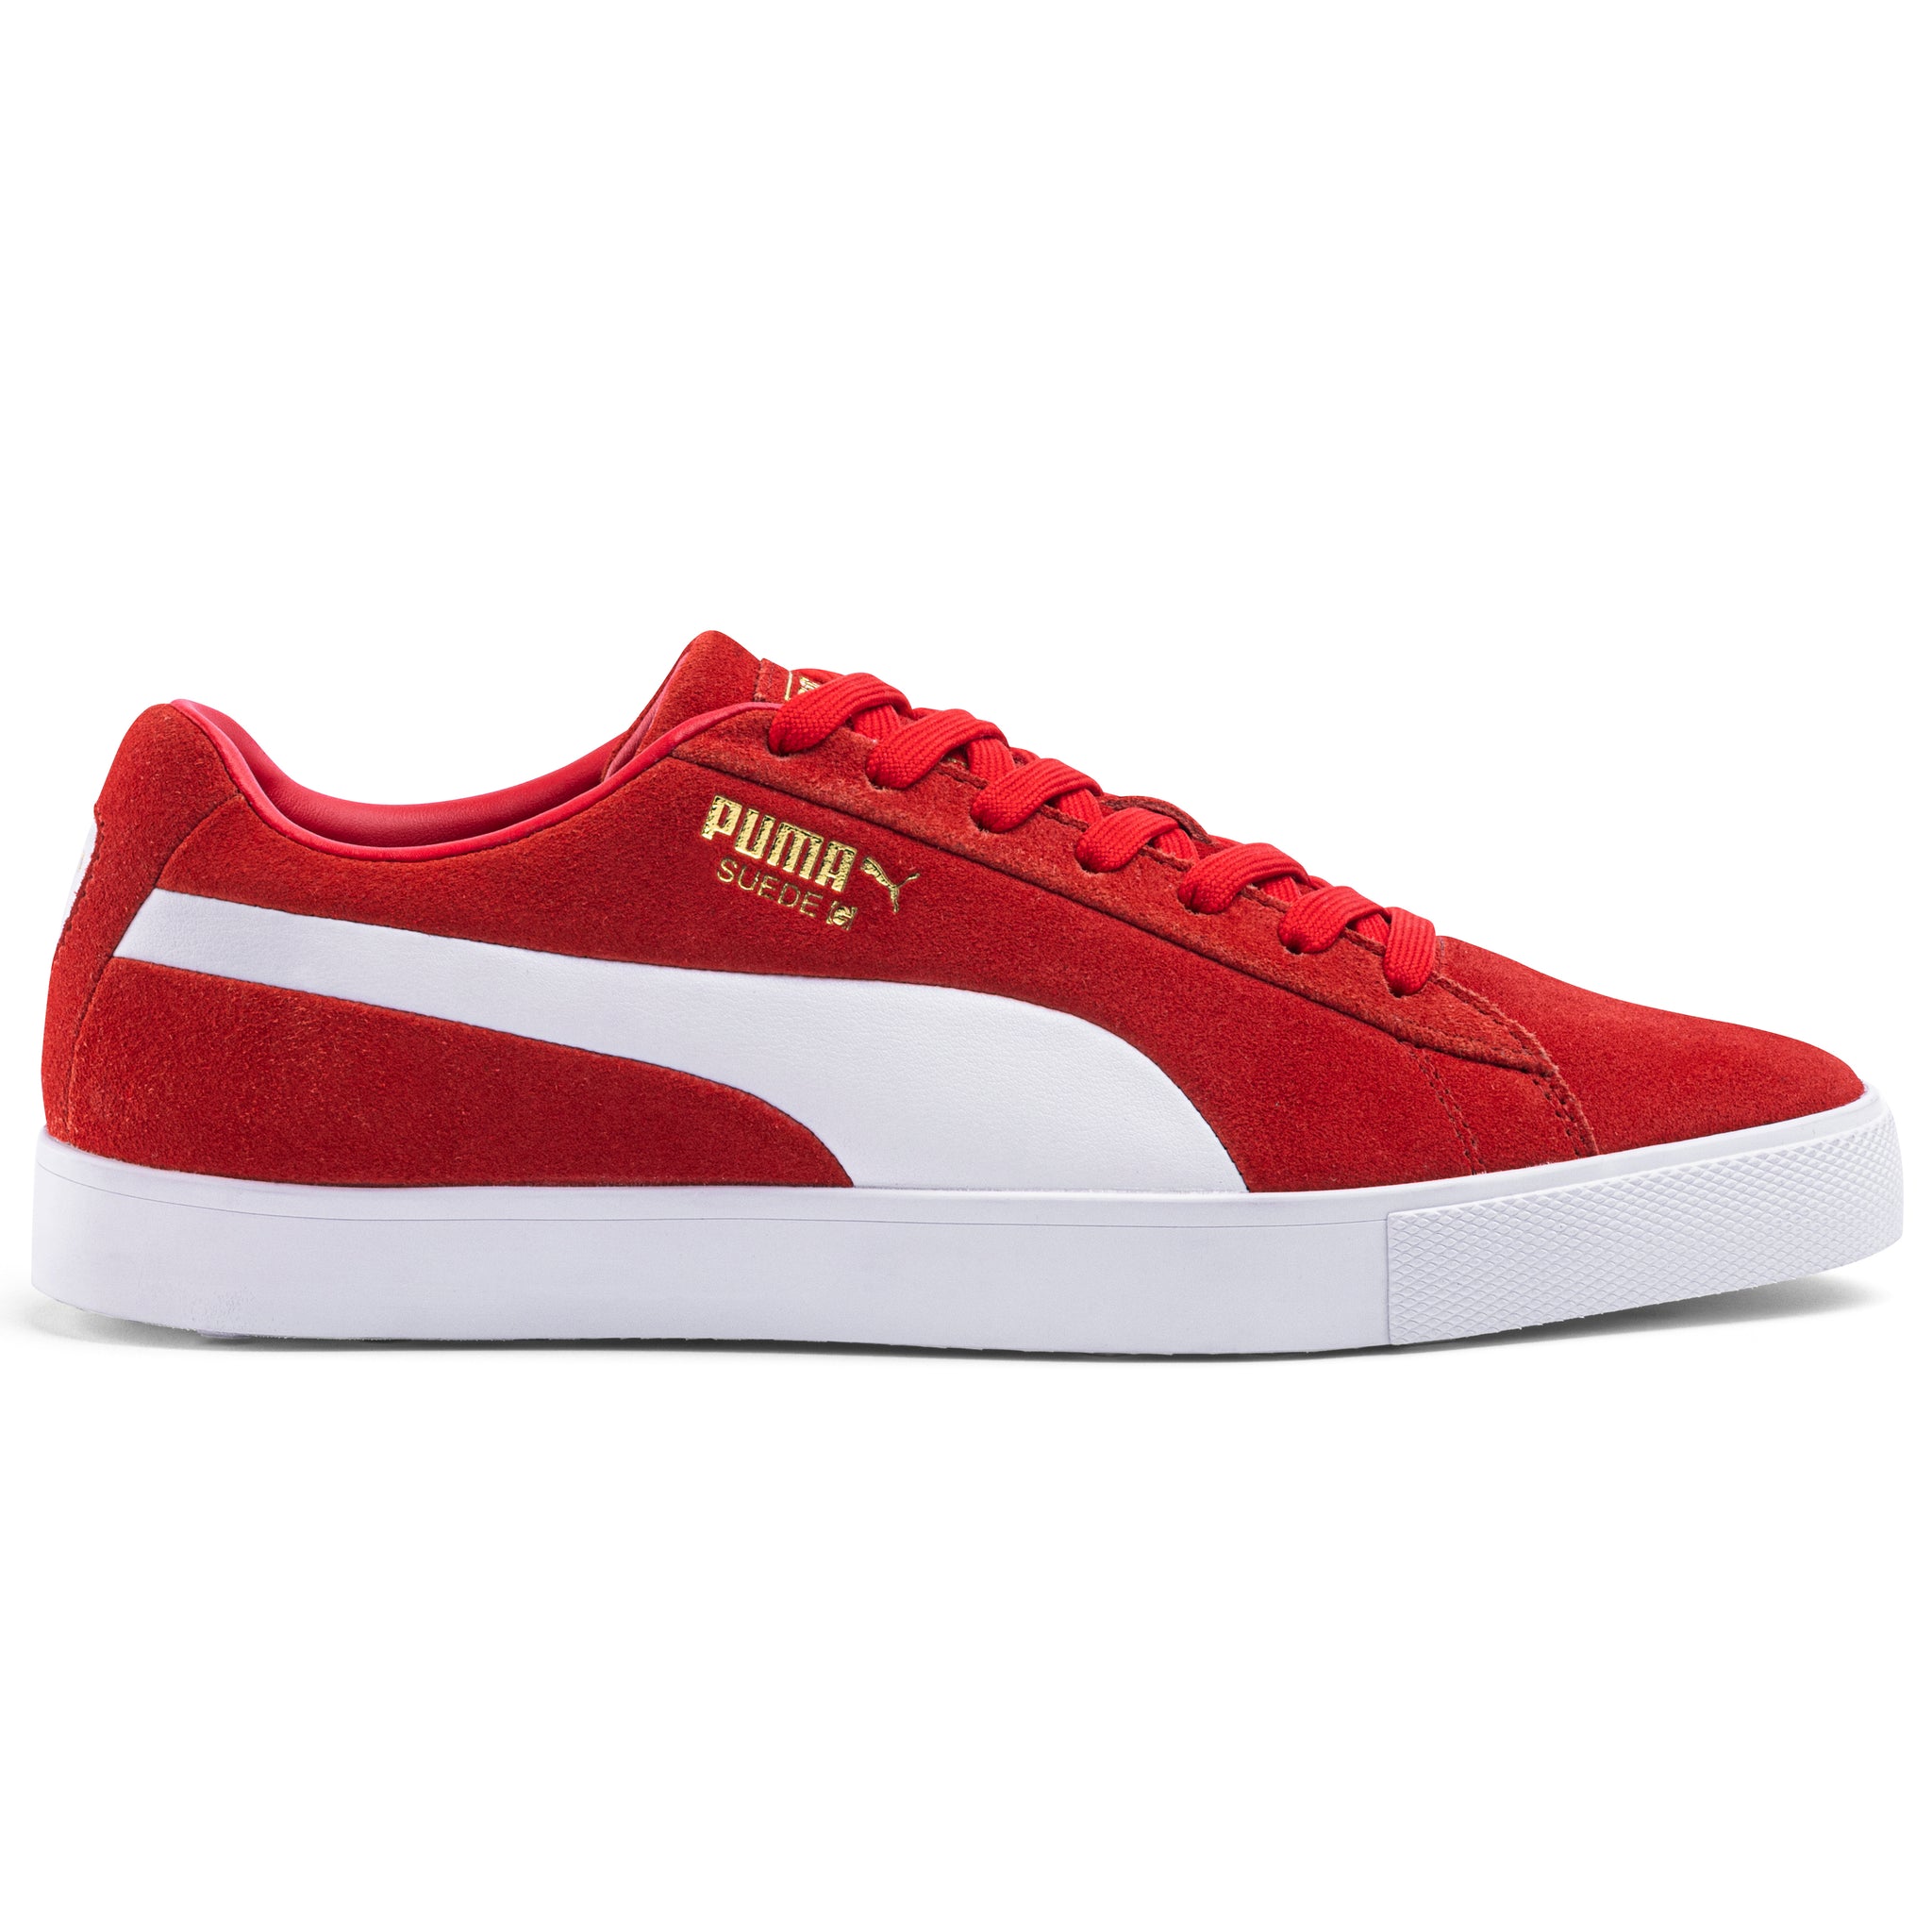 puma-fusion-suede-for-all-time-golf-shoes-379823-for-all-time-red-puma-white-01